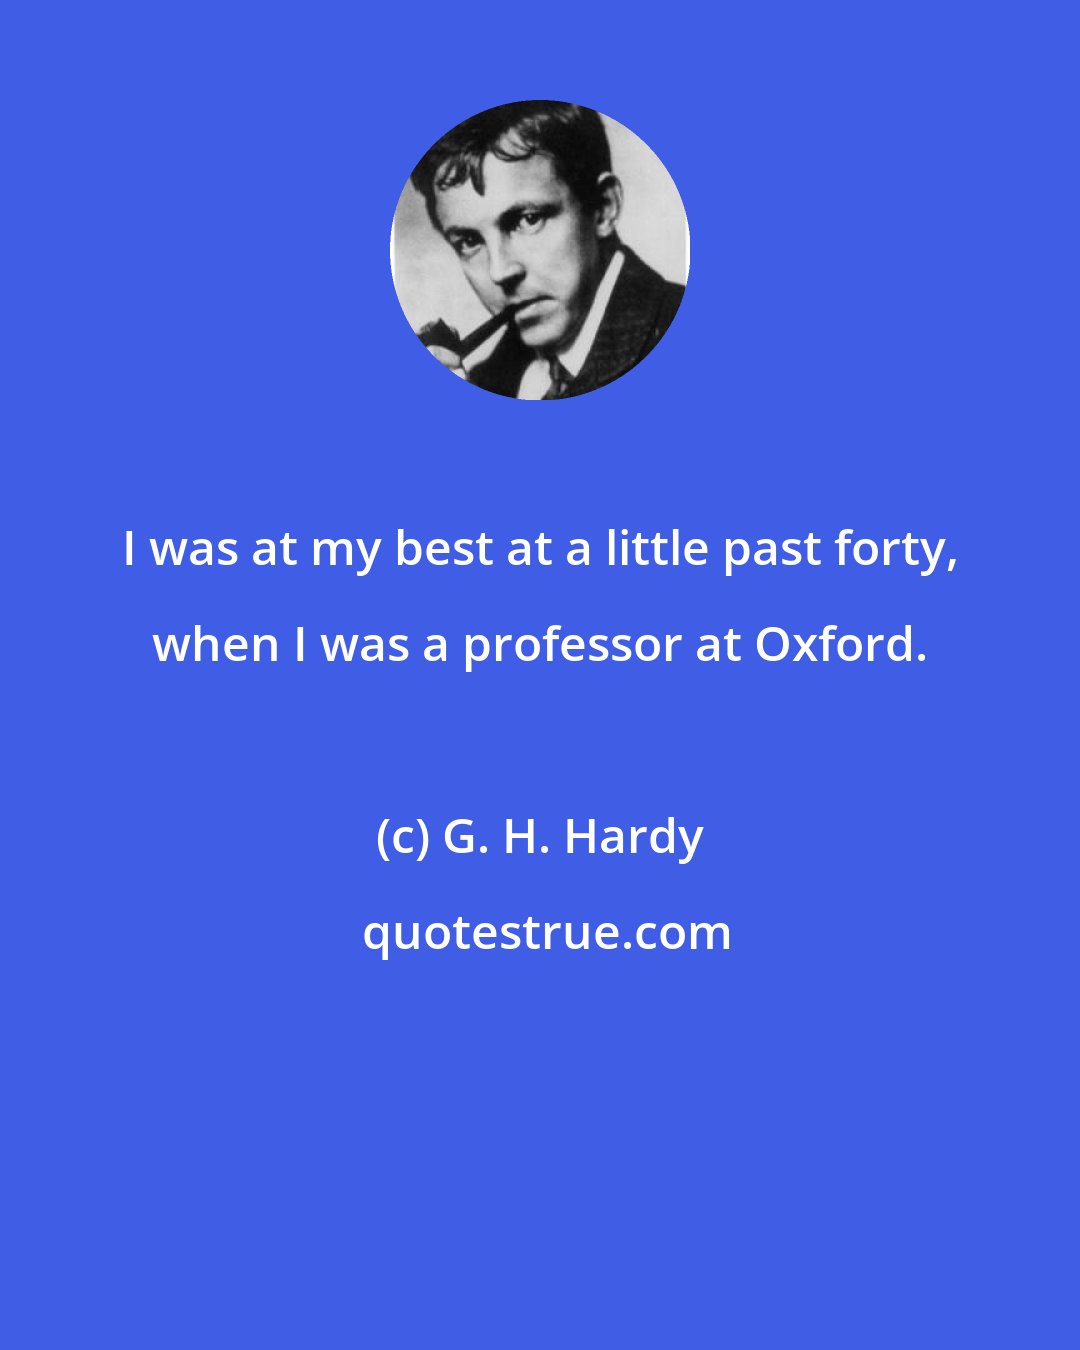 G. H. Hardy: I was at my best at a little past forty, when I was a professor at Oxford.